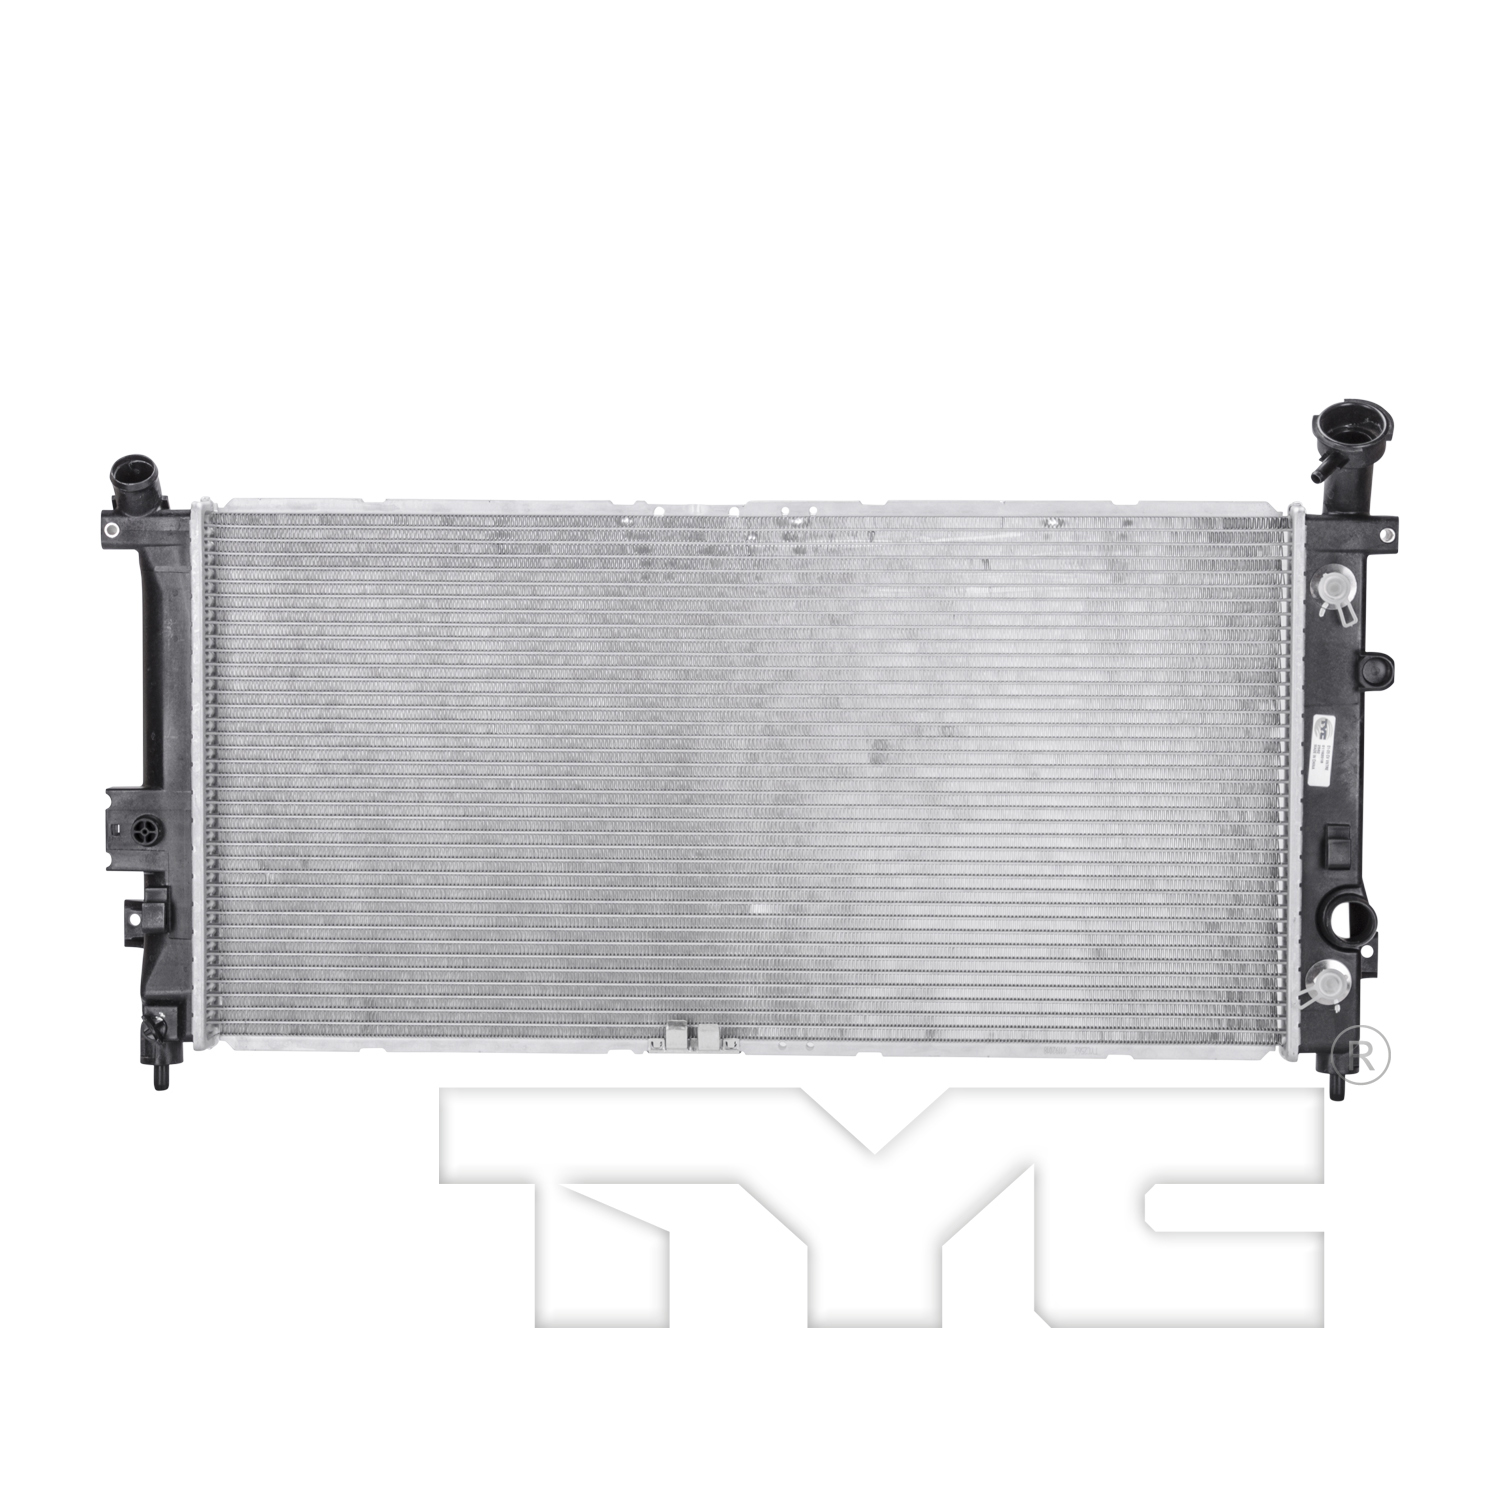 Aftermarket RADIATORS for SATURN - RELAY, RELAY,05-06,Radiator assembly